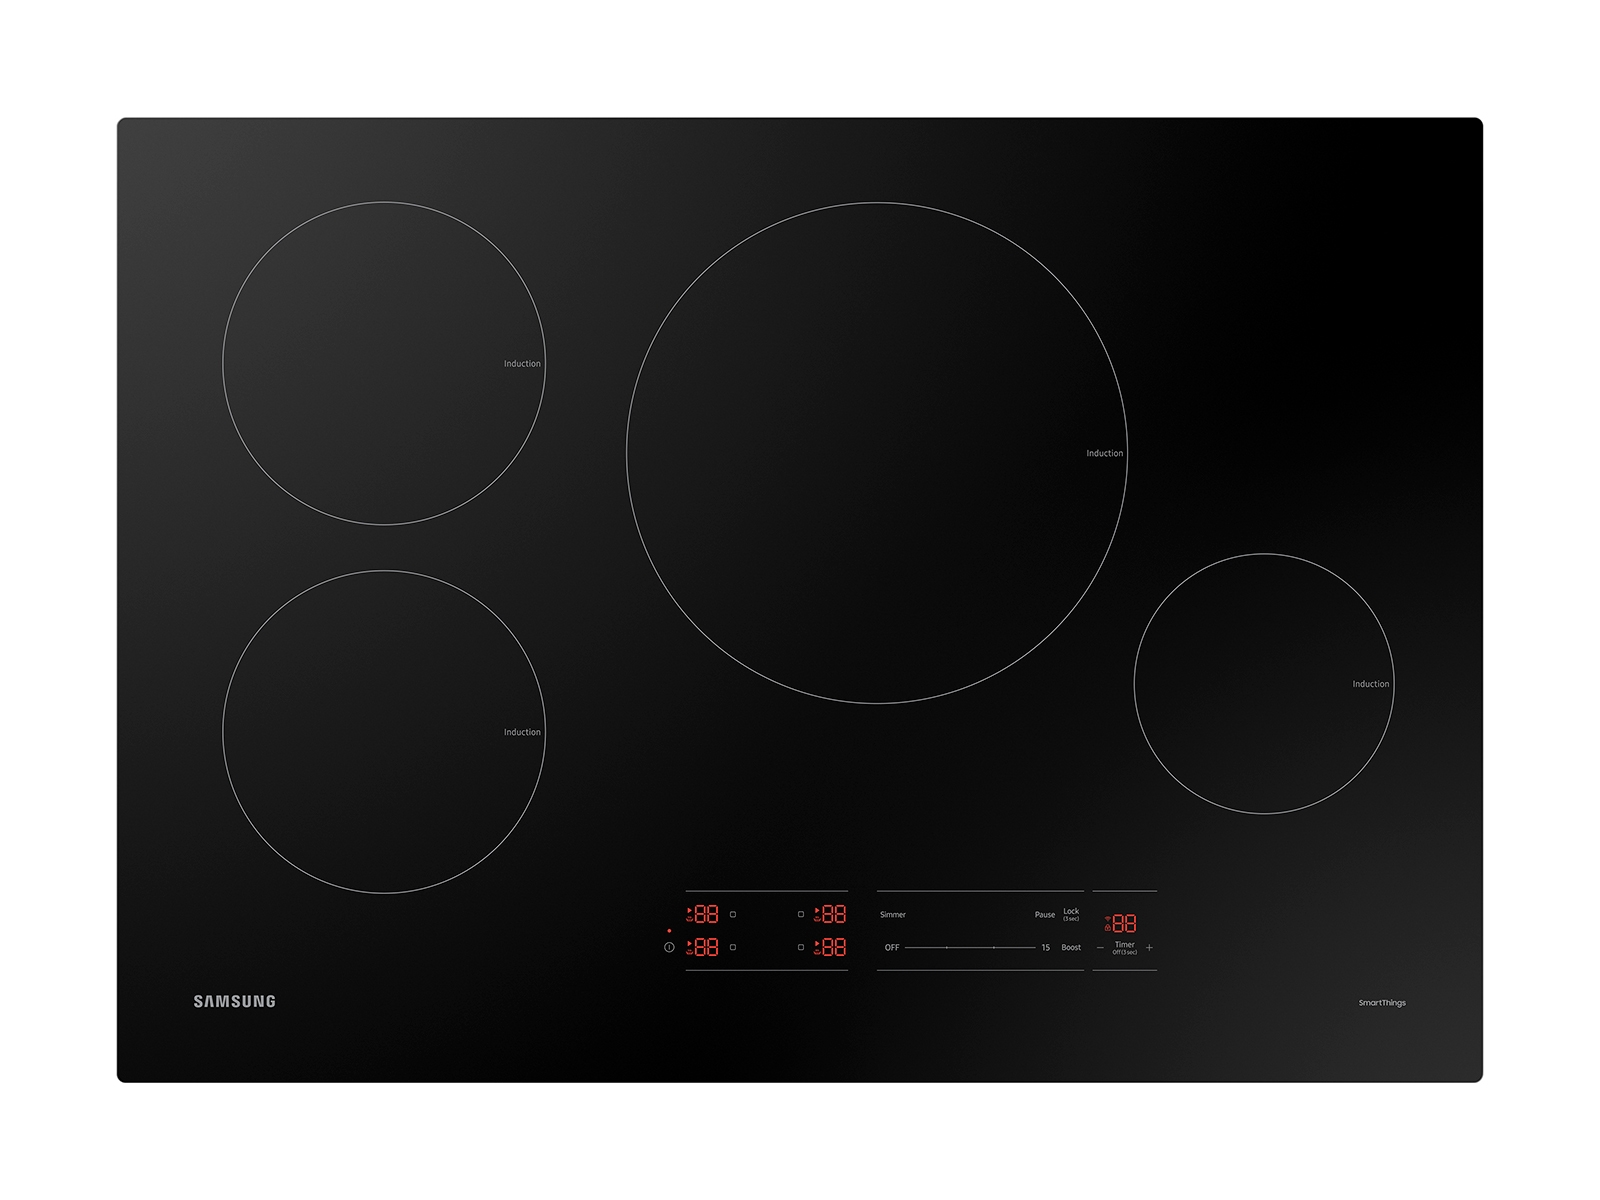 Wholesale Combined Two Induction Burner and Two Infrared Cooktop